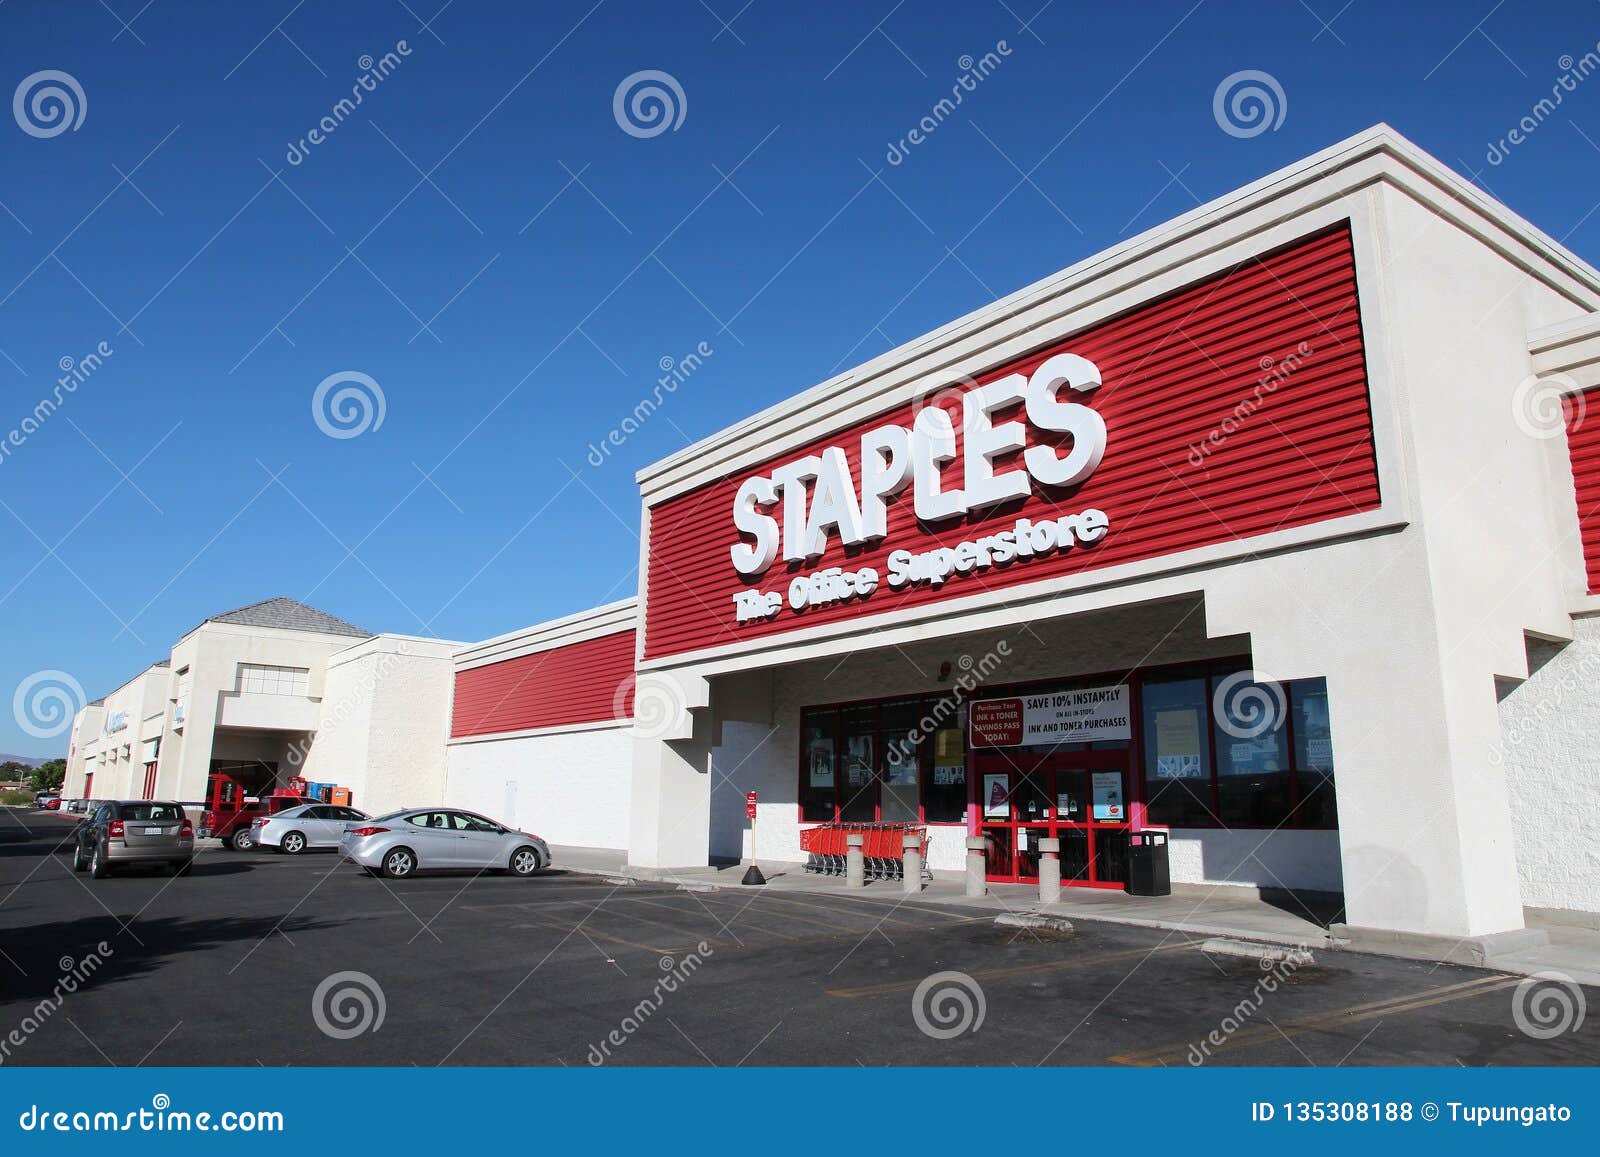 Staples Office Supply Ridgecrest United States April Superstore California Store Chain Has More Than Stores Worldwide 135308188 